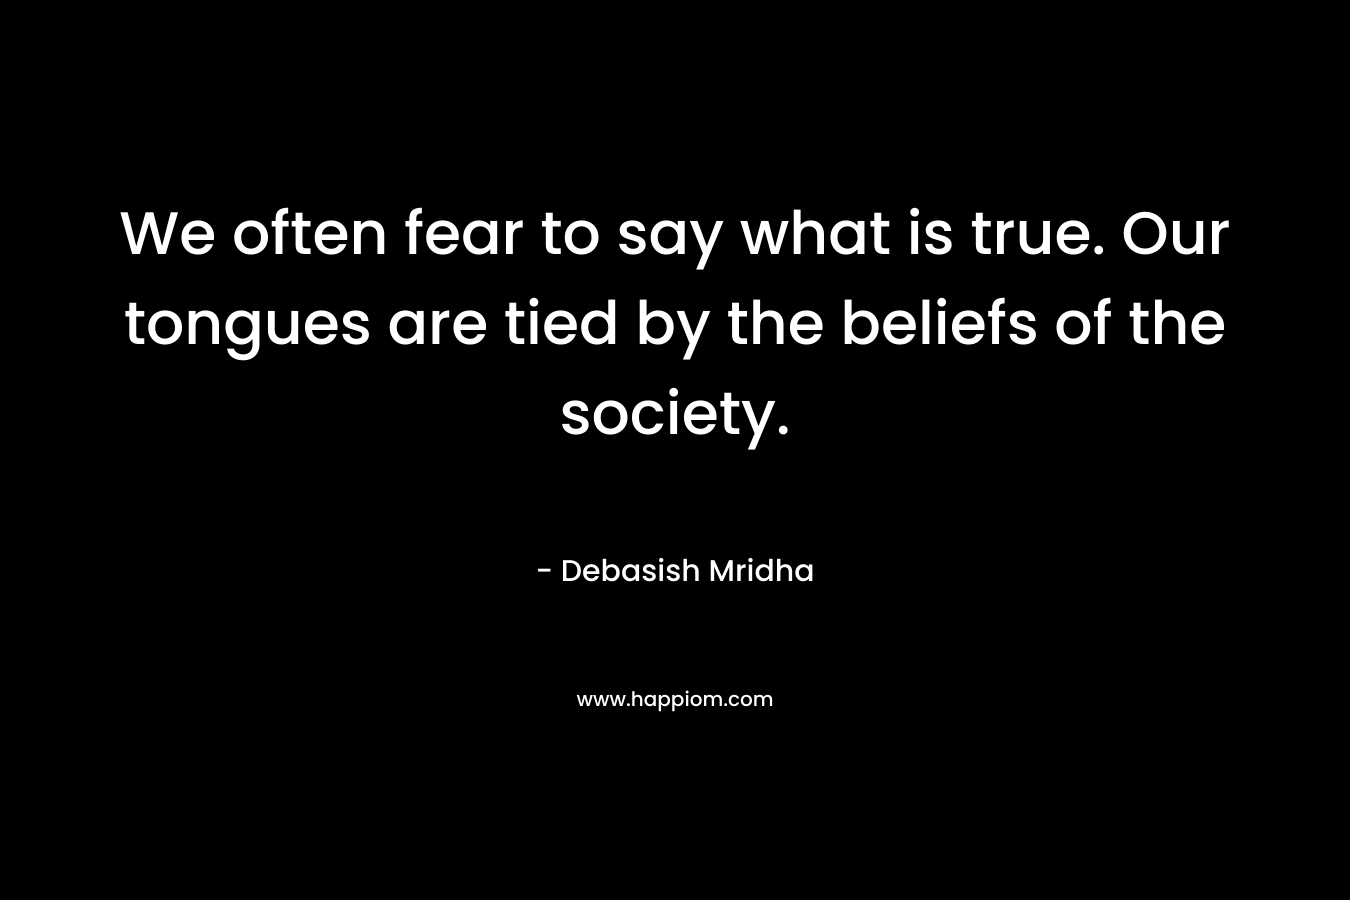 We often fear to say what is true. Our tongues are tied by the beliefs of the society.